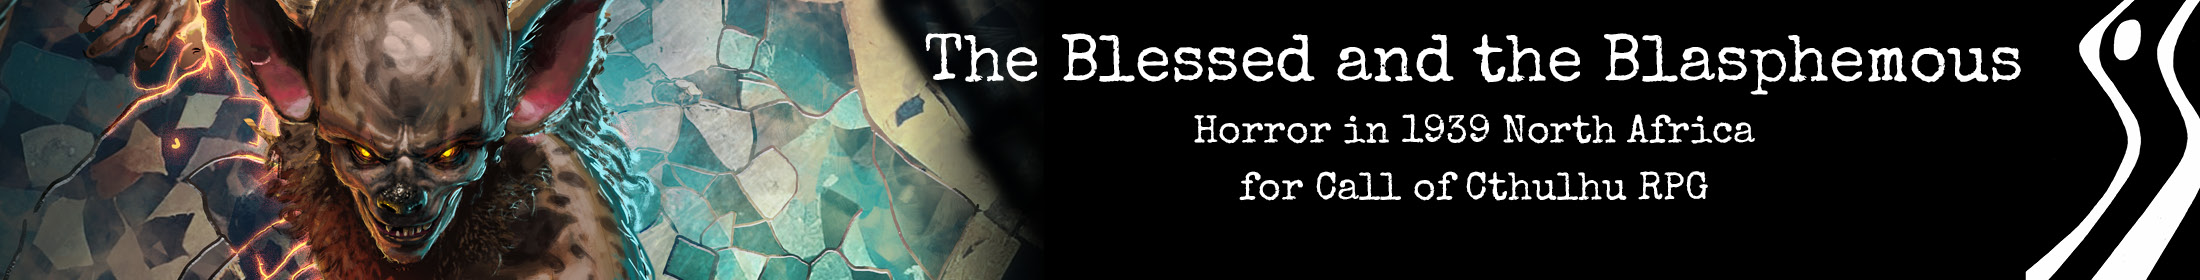 The Blessed and the Blasphemous